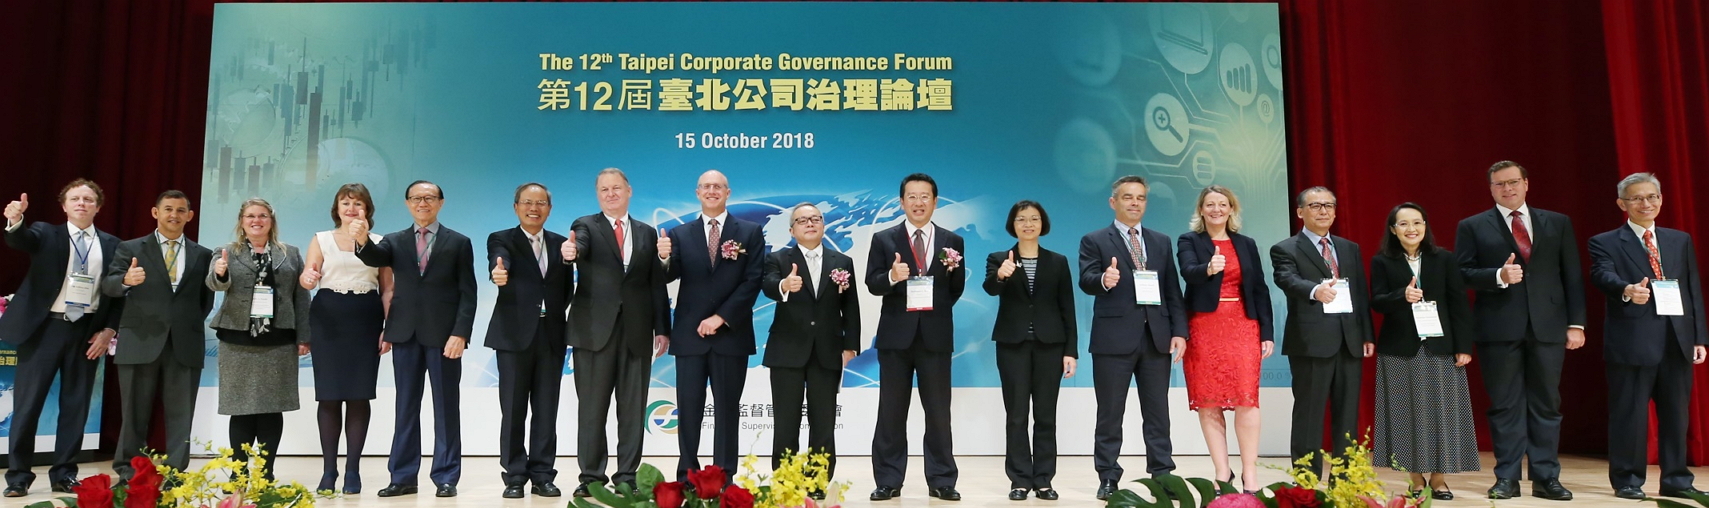 Financial Supervisory Commission (SFC) held the “12th Taipei Corporate Governance Forum” on October 15th, 2018. The forum invited Mr. Jun-ji Shih, ROC Vice Premier, and Mr. Anthony Flintoff, General Manager of S&P Global Ratings to give keynote speeches. The attendees of the forum included representatives from regulators, corporate governance research institutes, stock exchanges, and other related institutions from 10 countries and also invited over 600 representatives from listed companies.